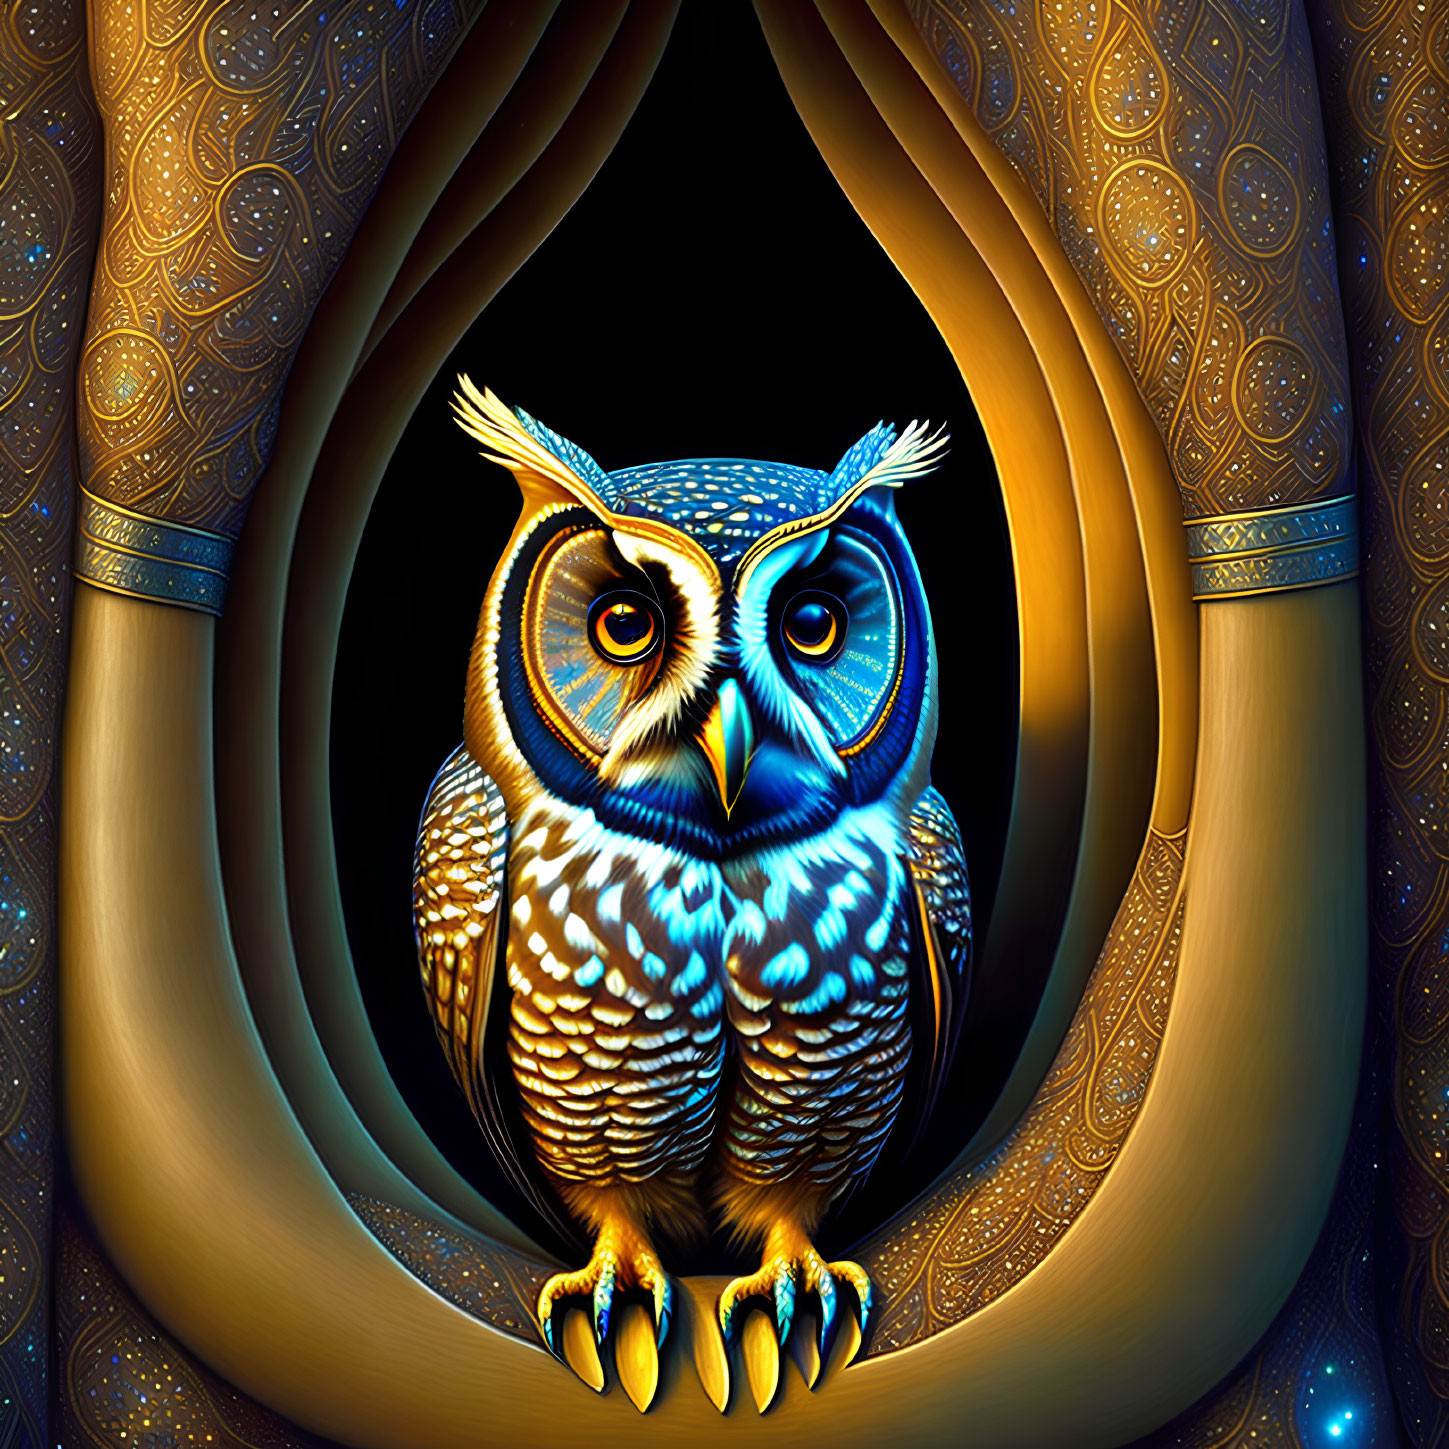 Colorful Stylized Owl Artwork with Glowing Eyes in Ornate Hollow